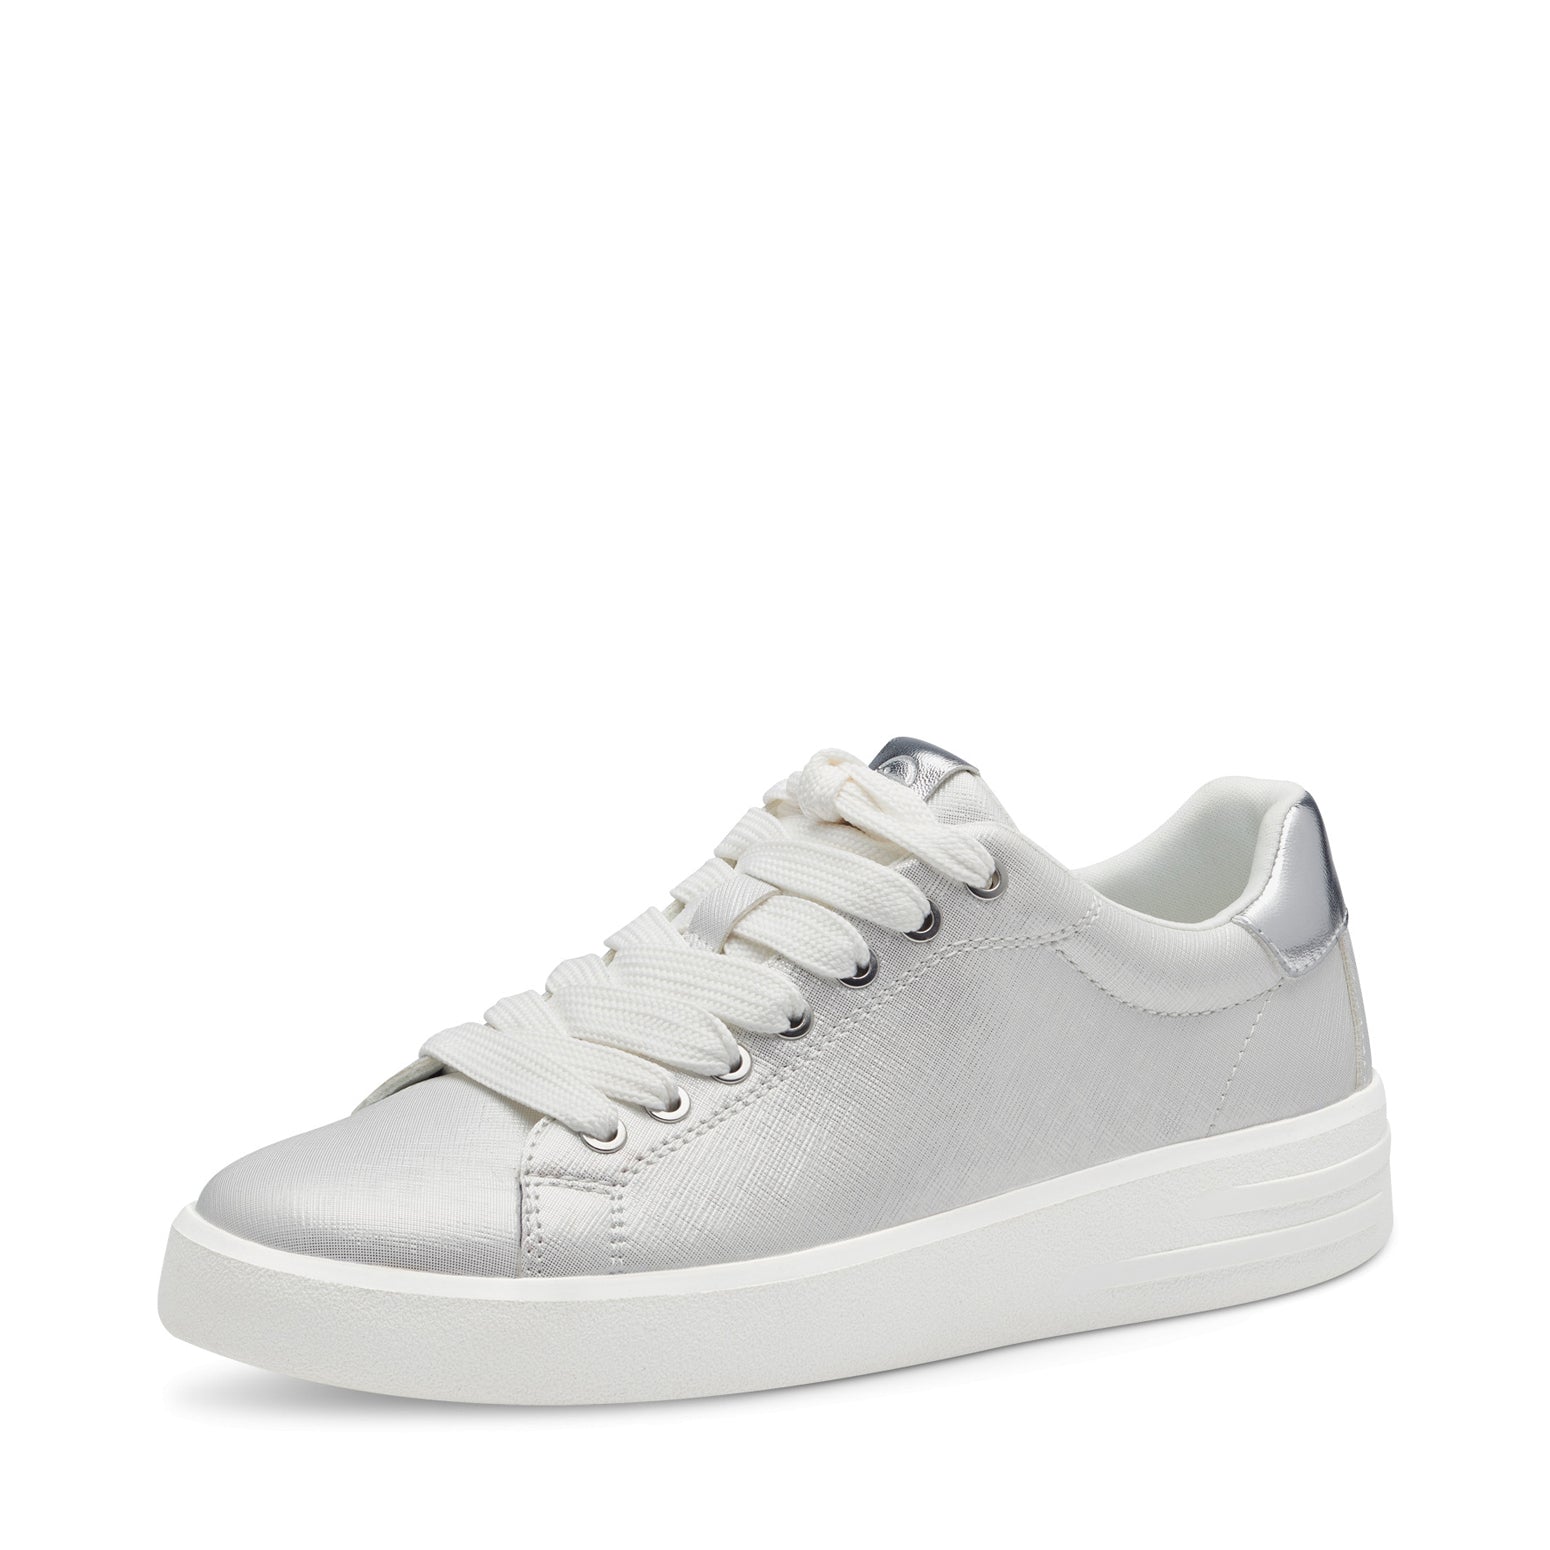 Tamaris Laced Trainer White/Silver